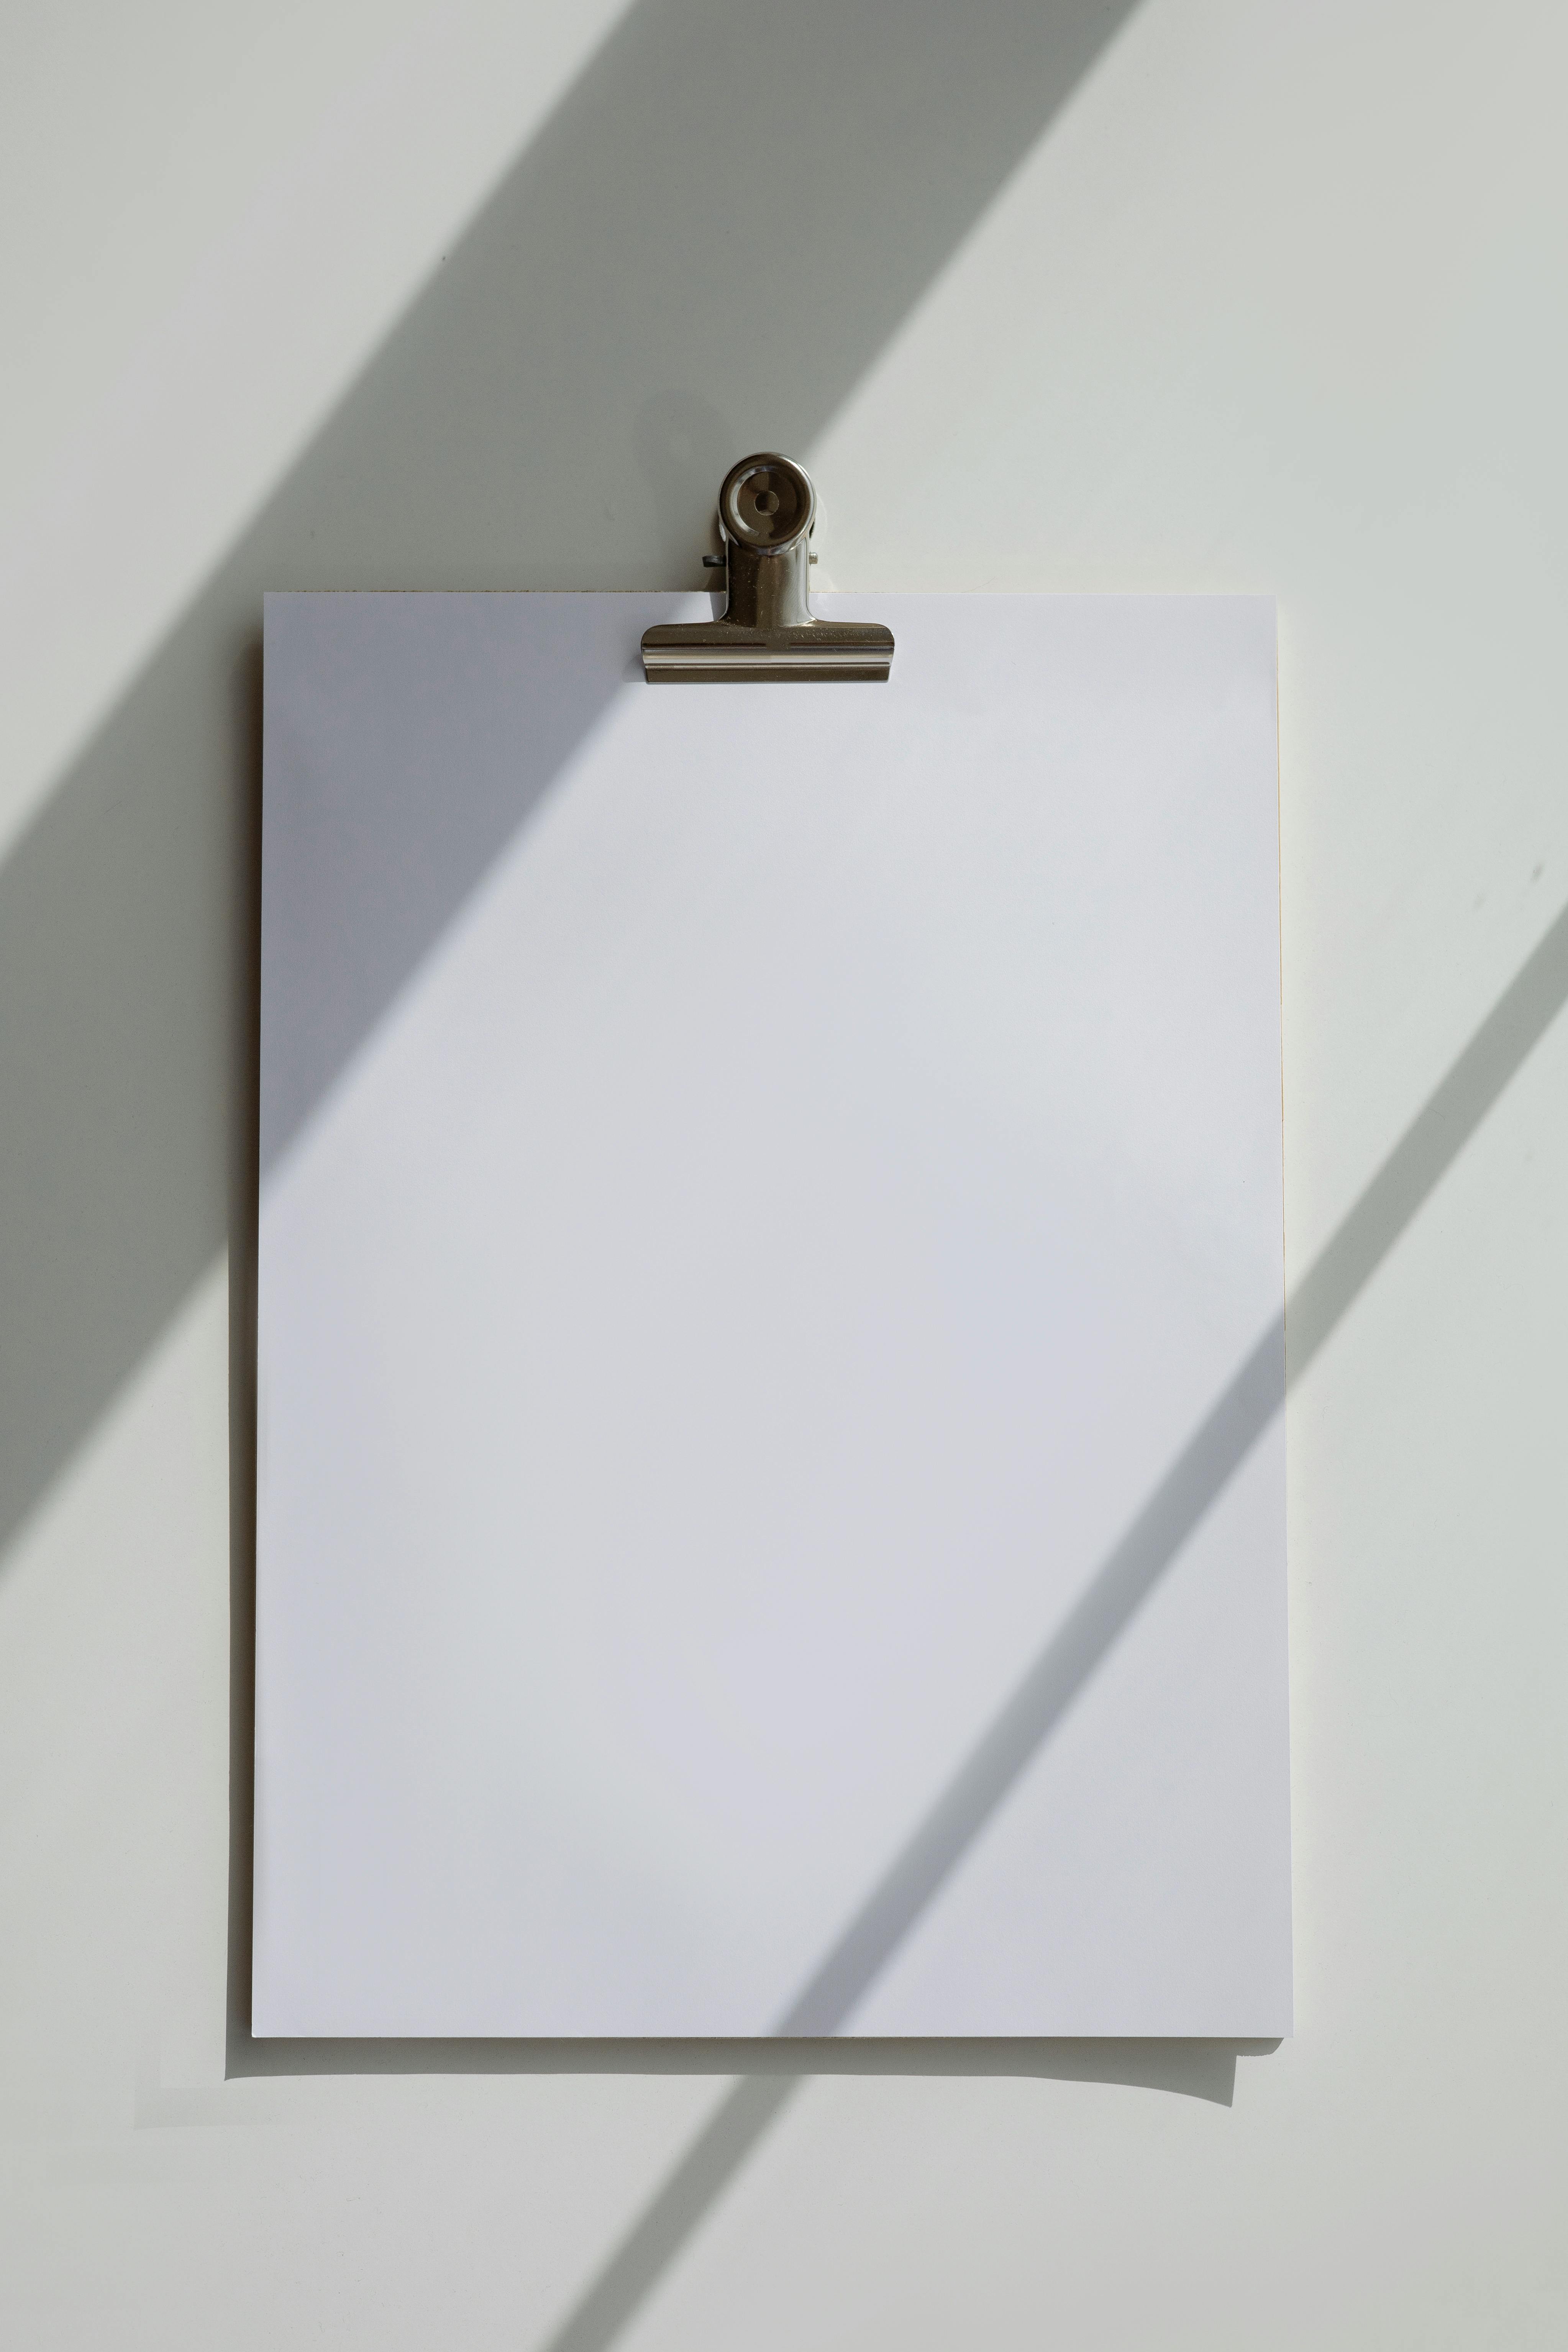 A Blank Bond Paper on a White Surface · Free Stock Photo